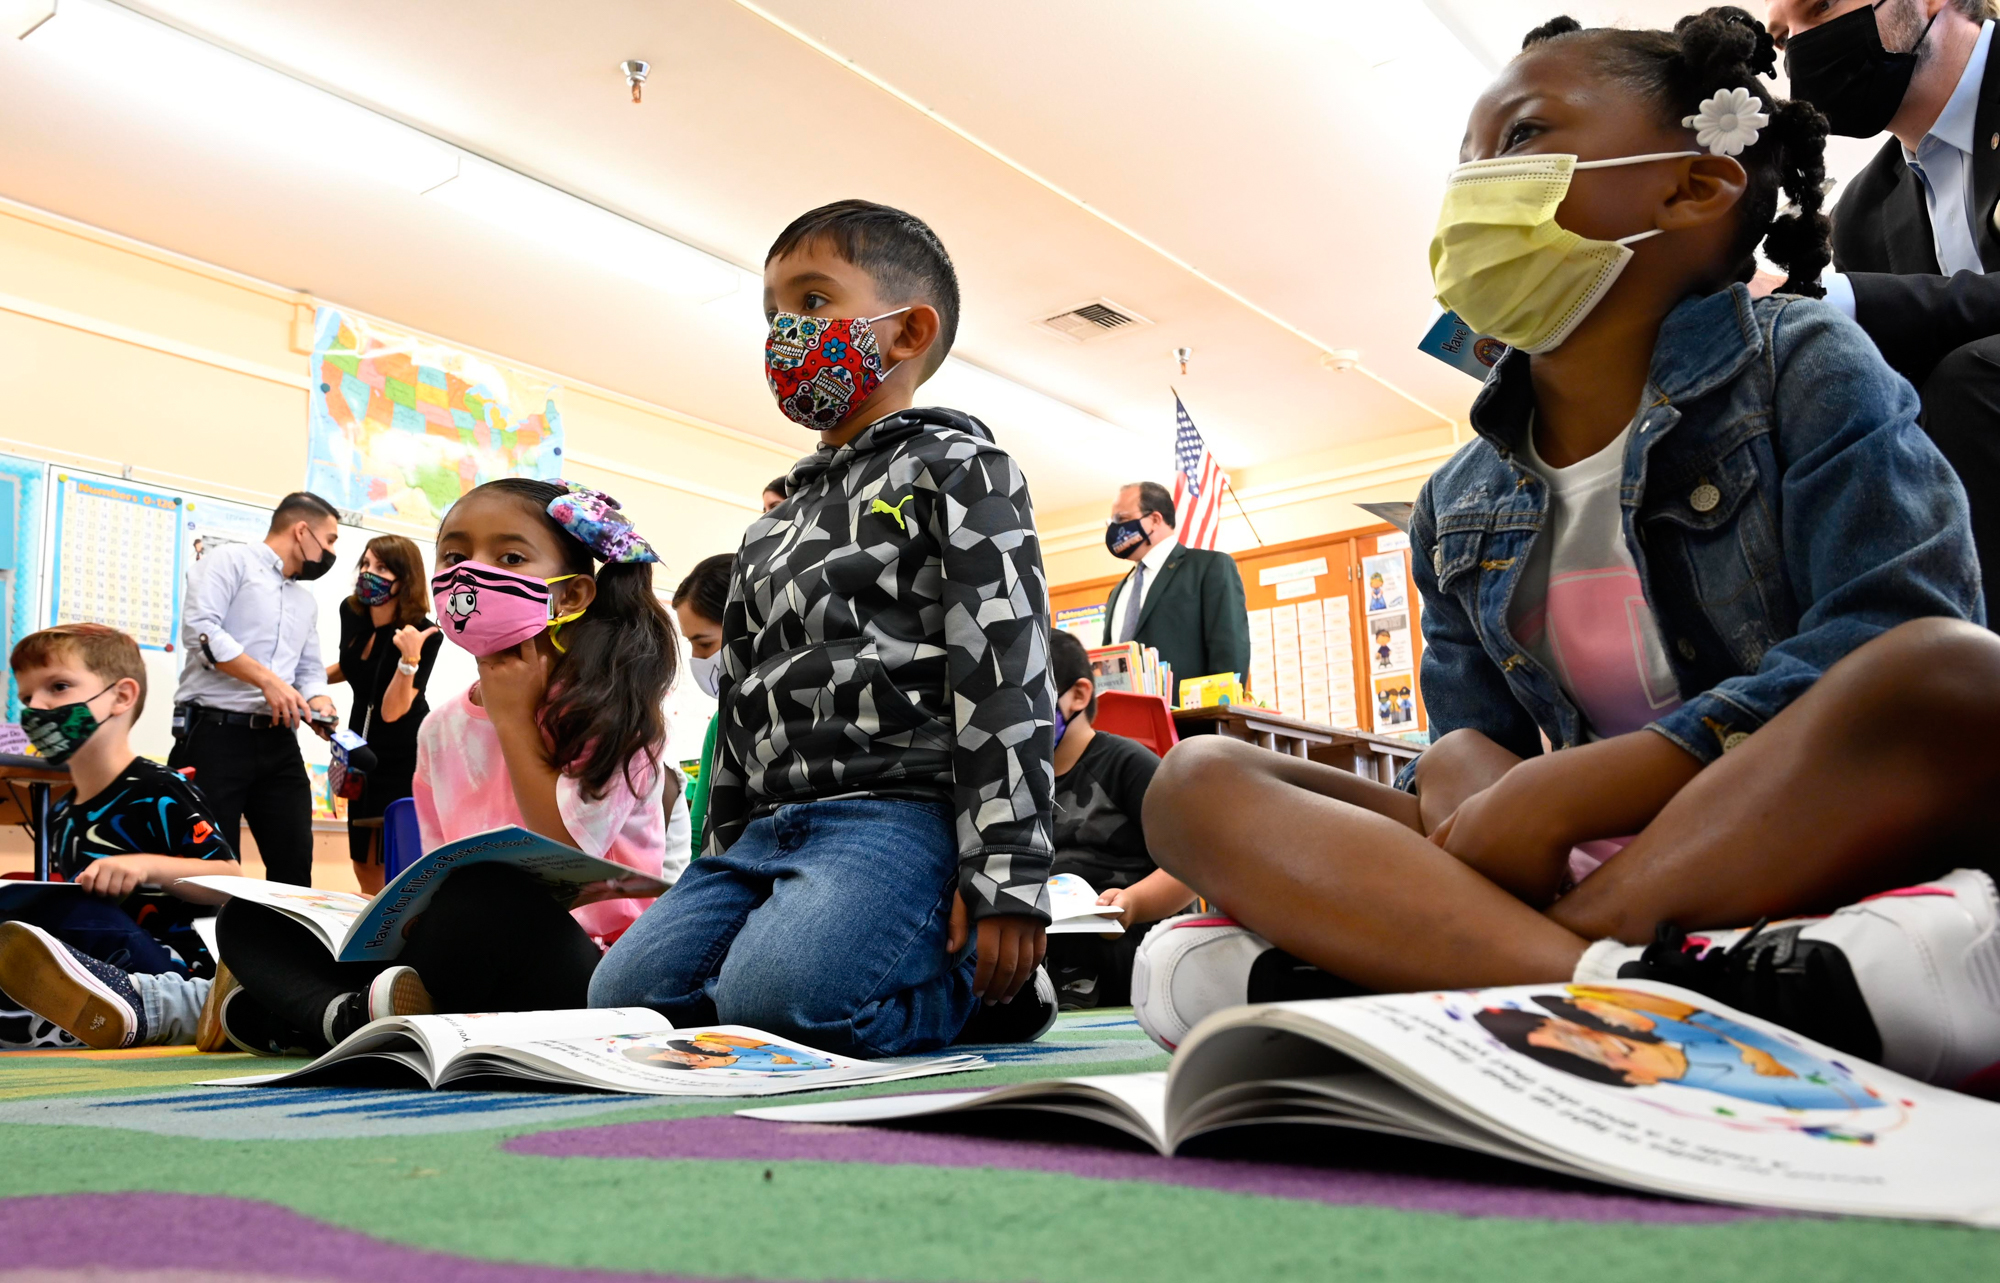 Students sit on the carpet wearing face masks and reading books.